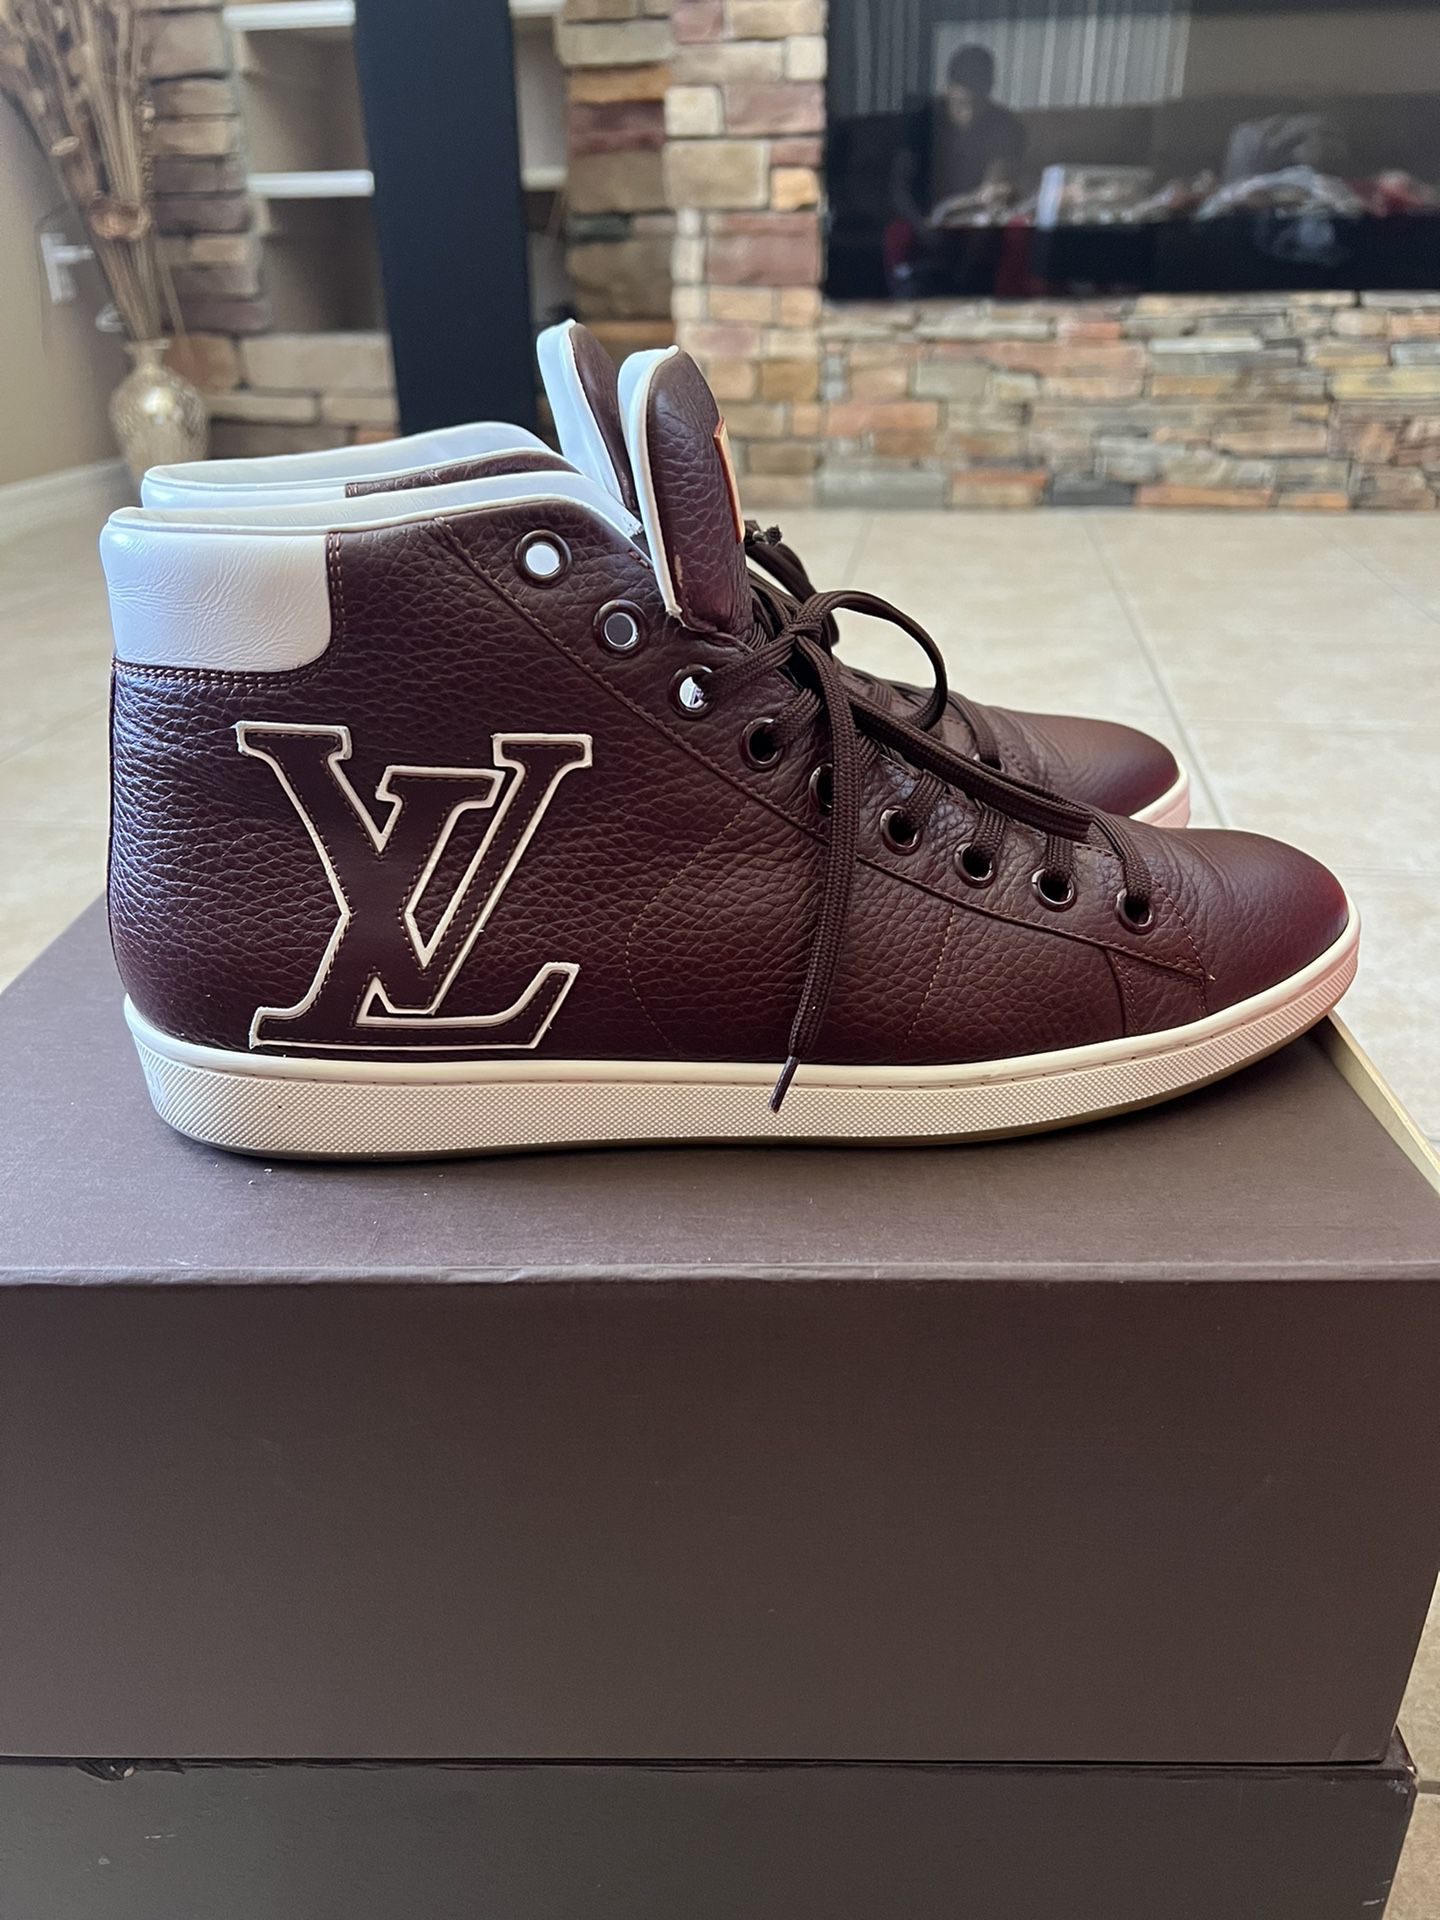 LV Sneakers Mens Size 11 US for Sale in Kissimmee, FL - OfferUp